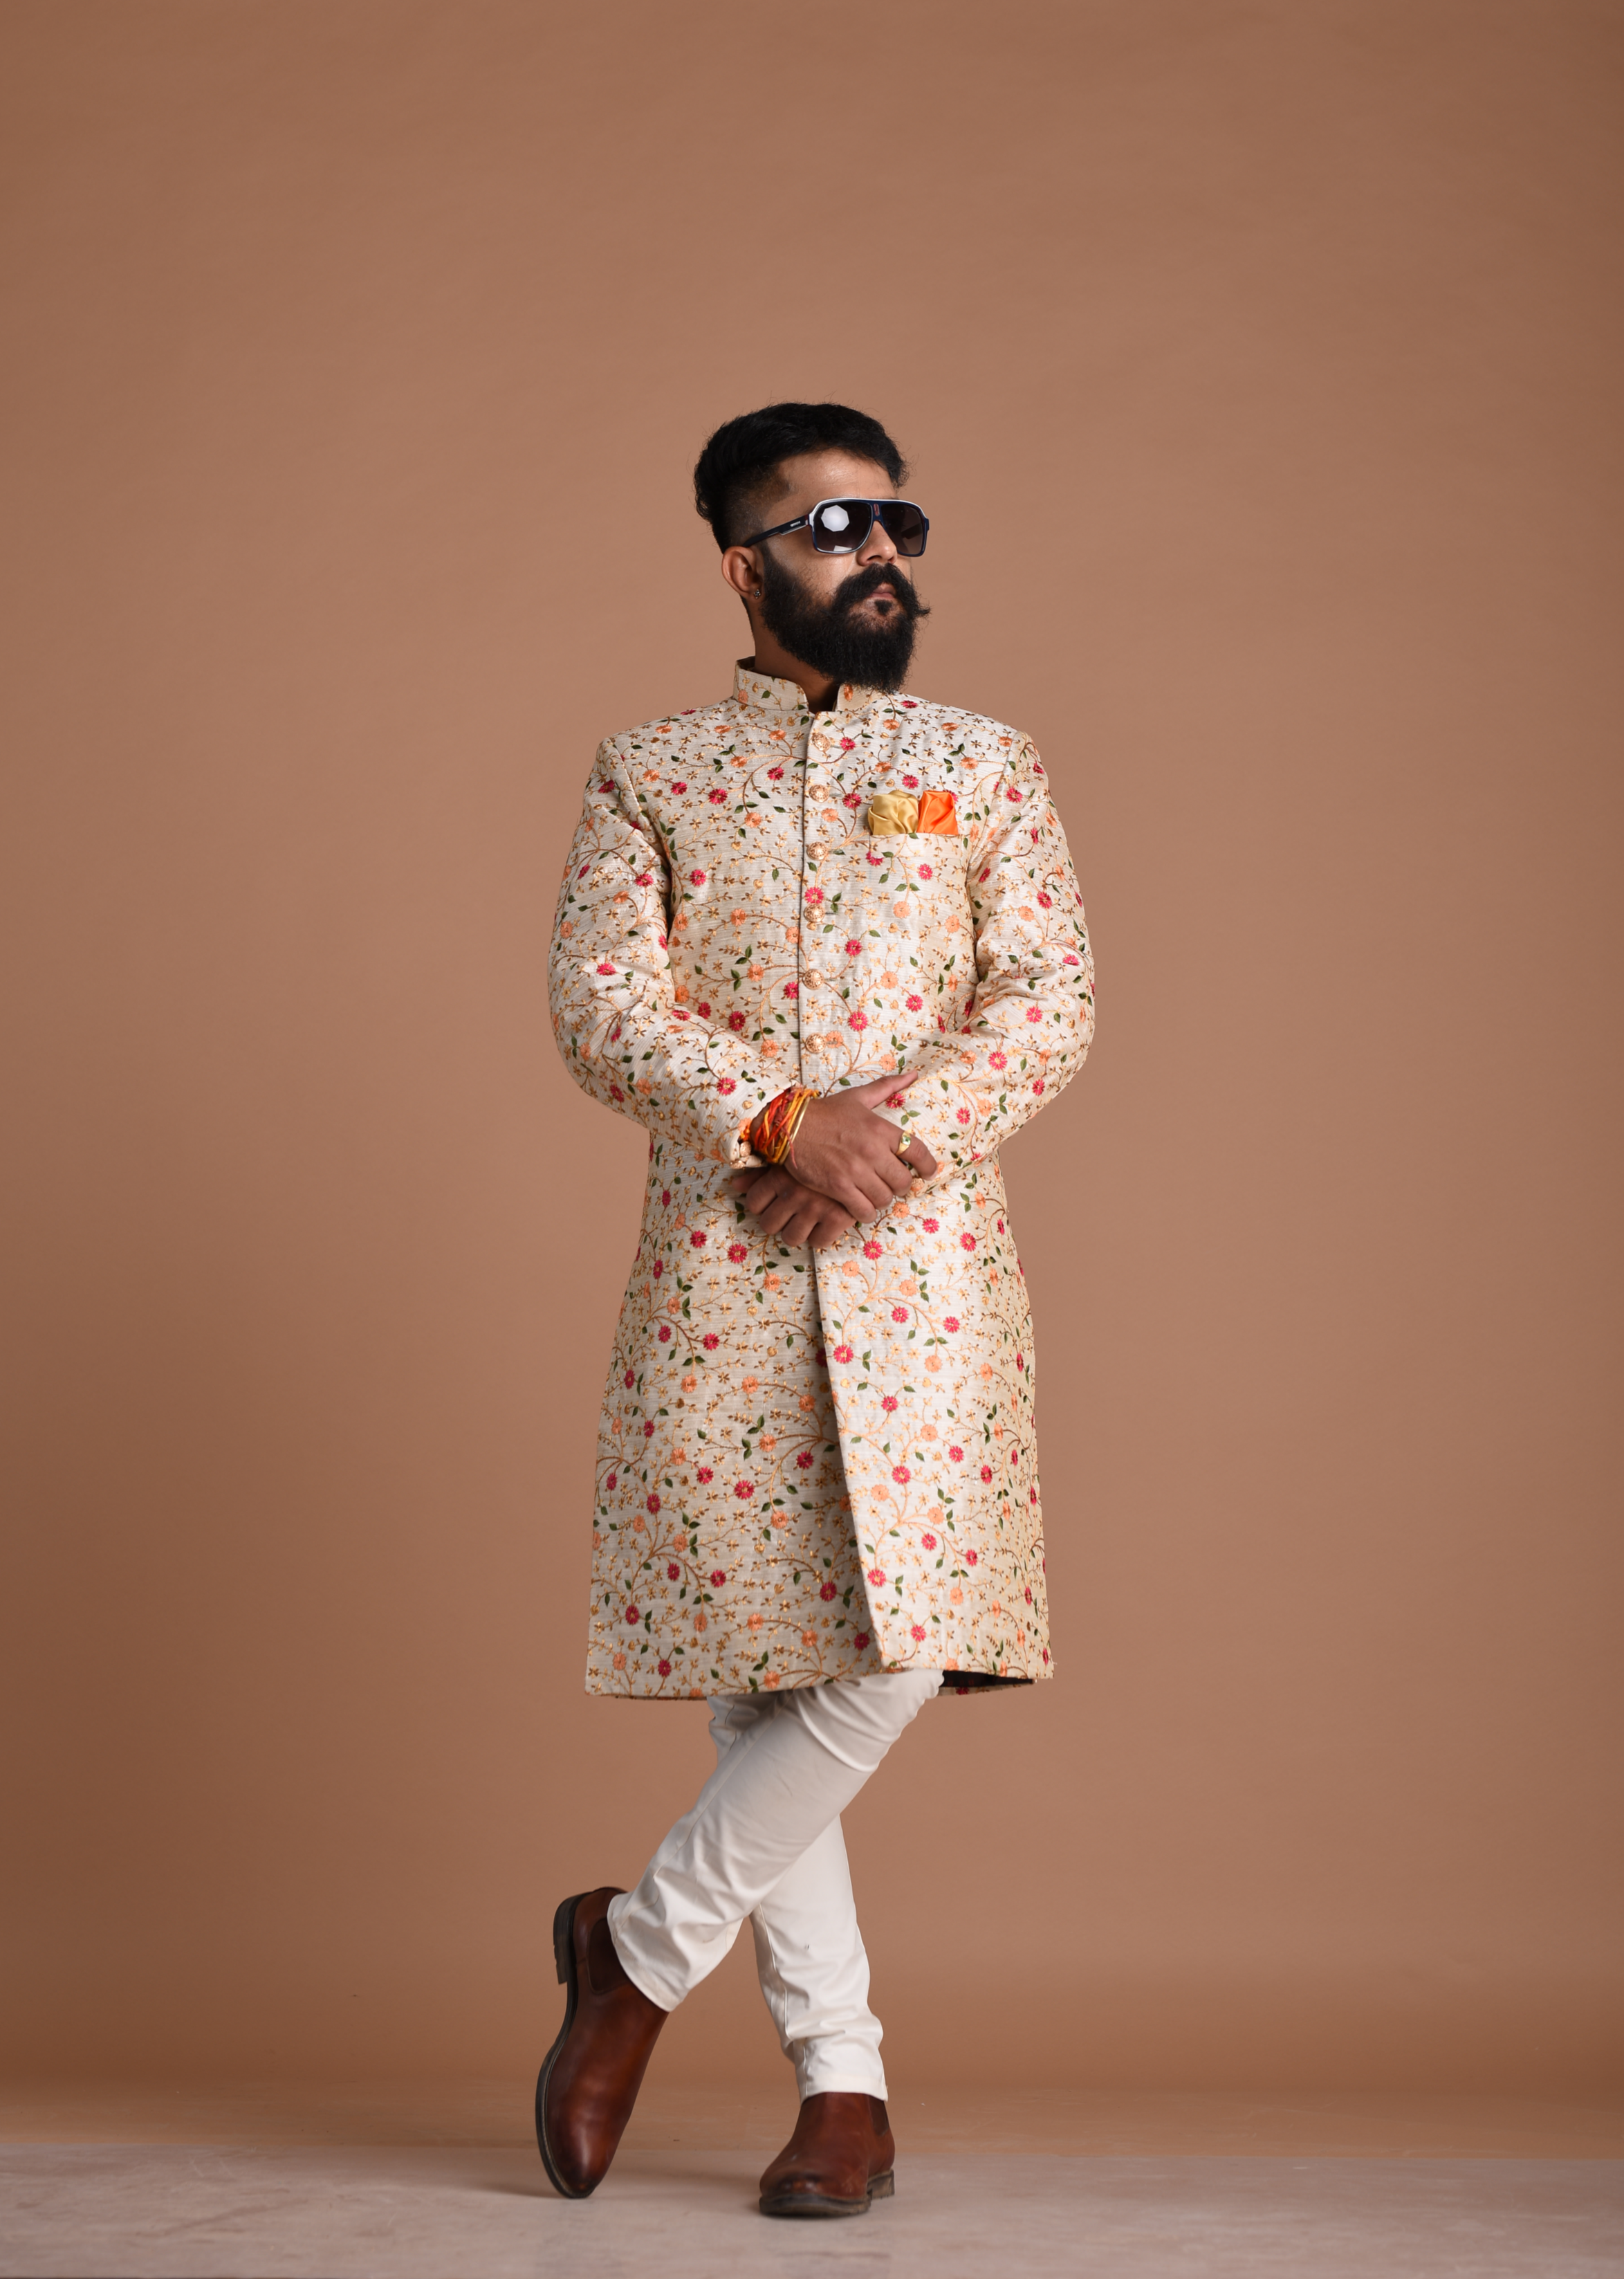 Alluring Multi-Color Floral Pattern Embroidered Cream Sherwani Achkan | Best For Wedding ,Grooms Formal Indian Events Festivals